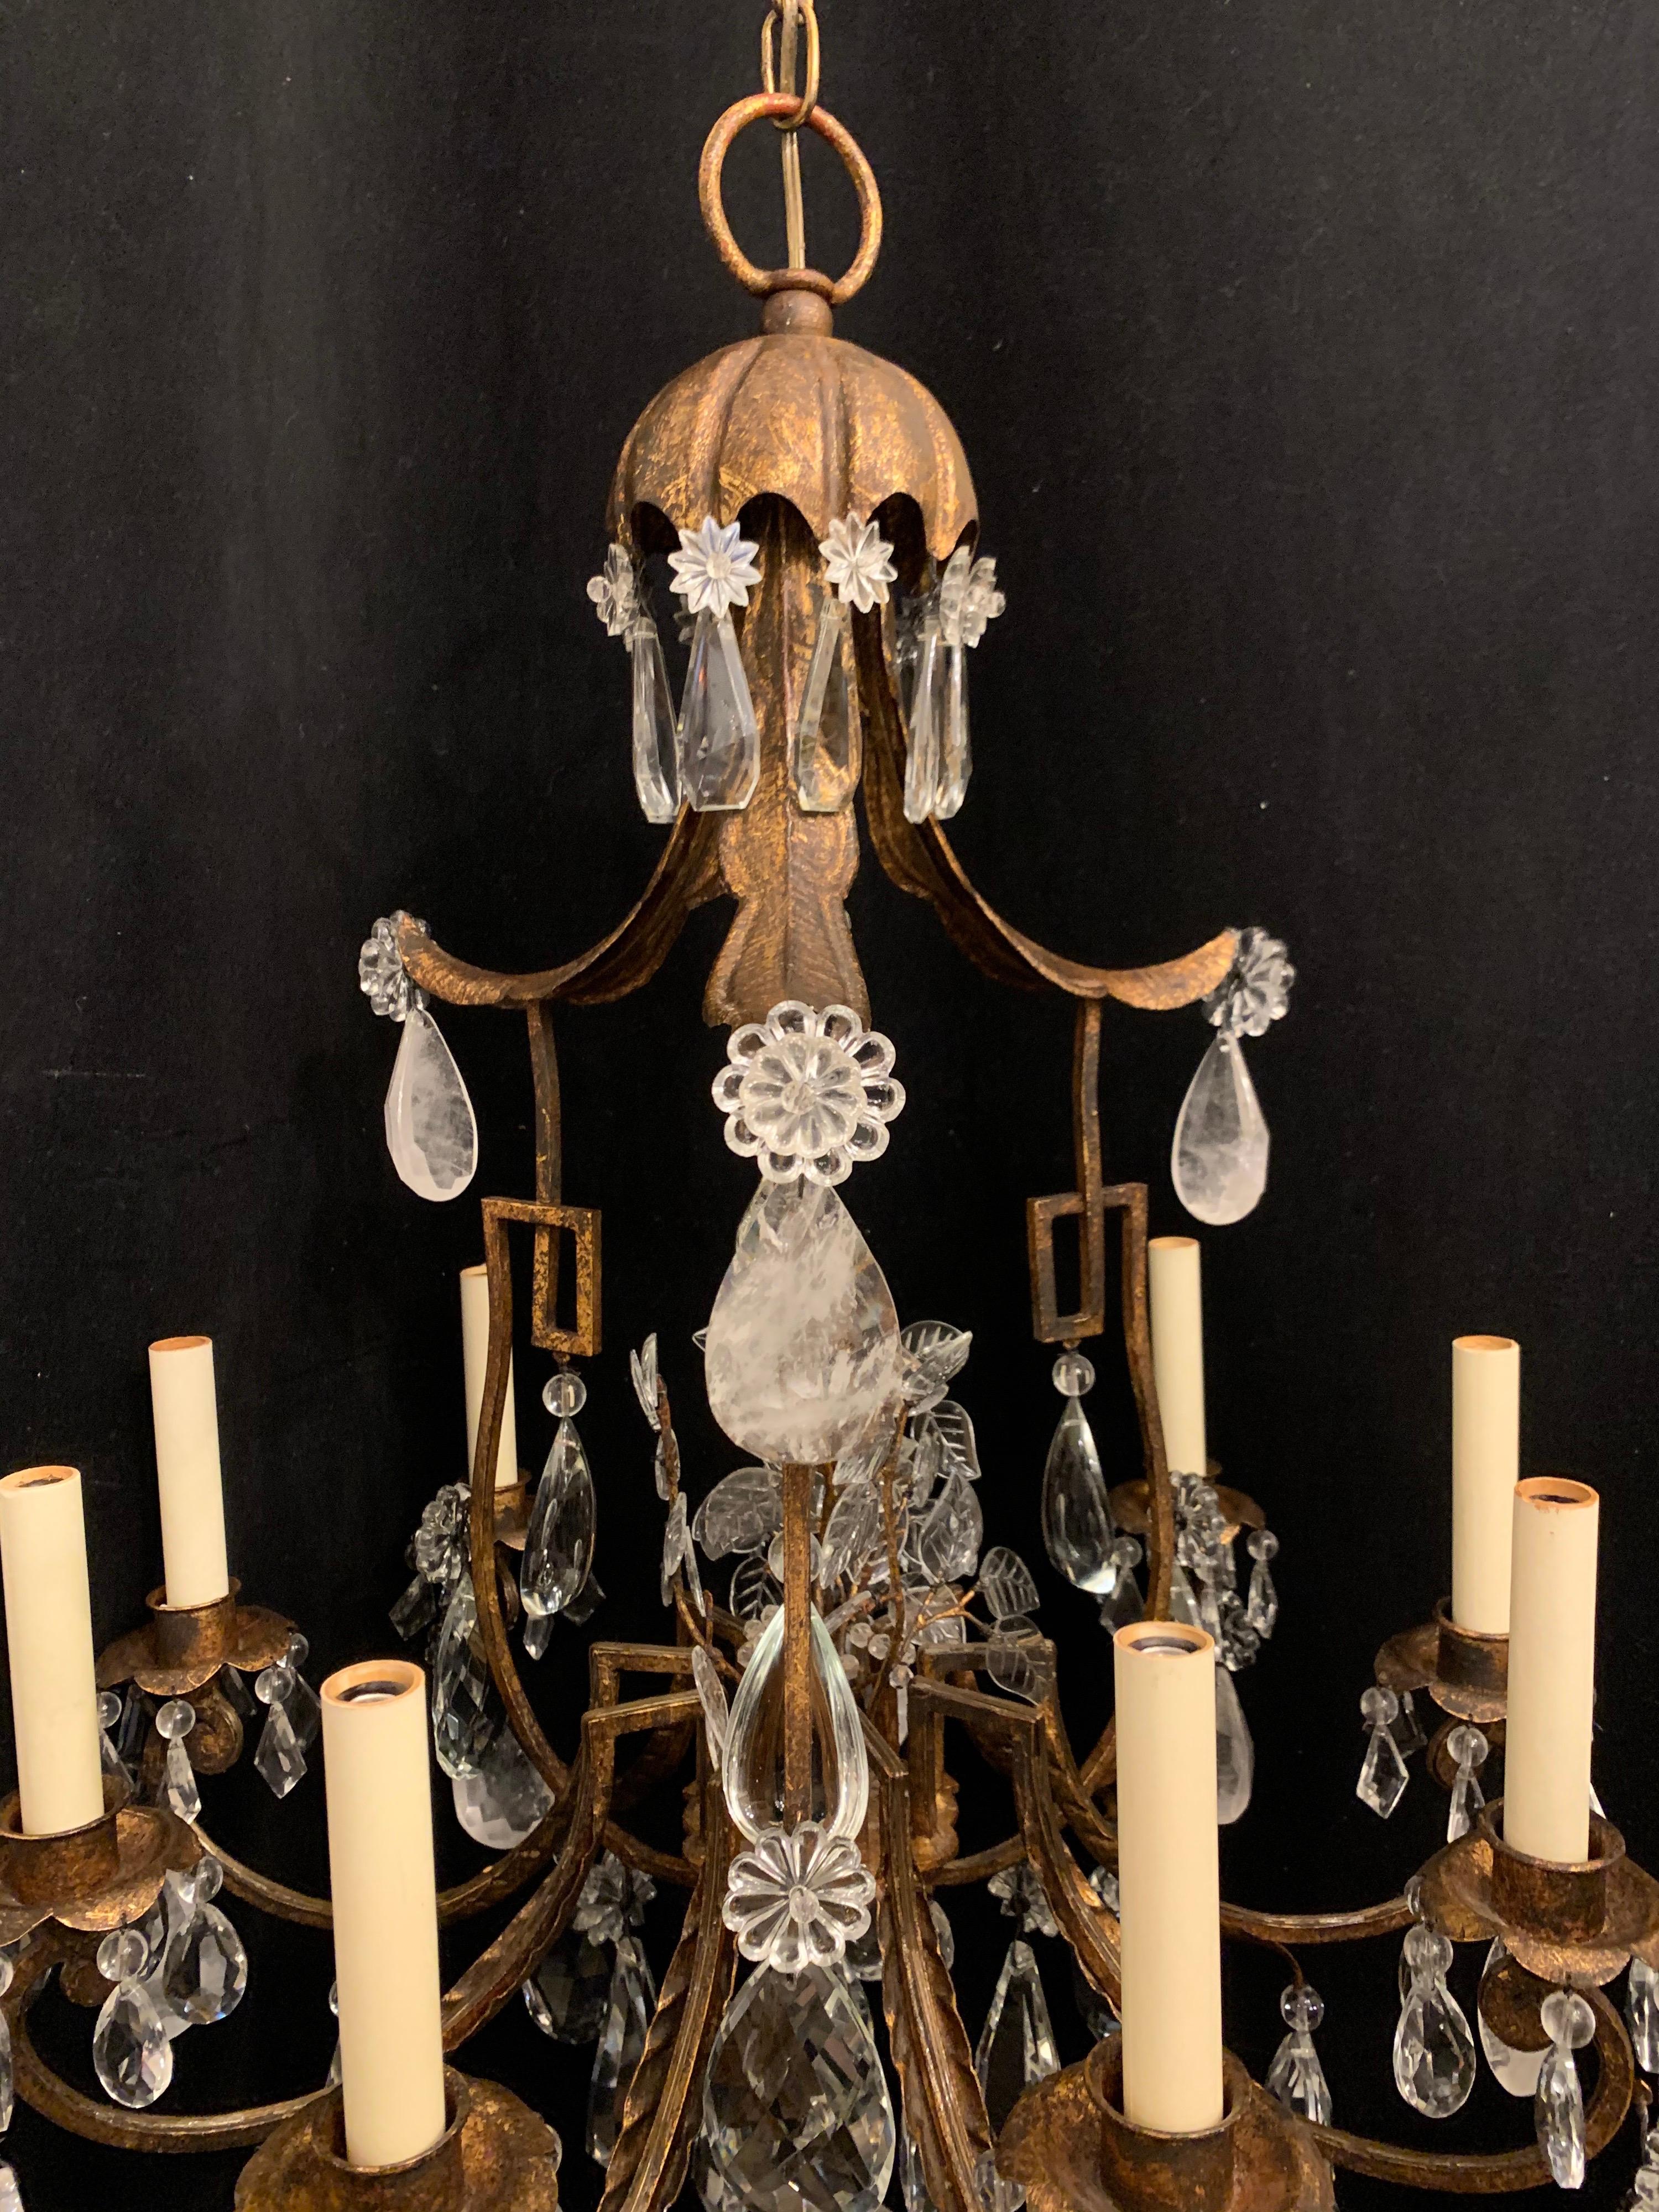 A wonderful French pagoda shaped gold gilt and rock crystal Baguès style chandelier with nine candelabra lights this fixture is rewired and comes with chain canopy and mounting hardware for installation.